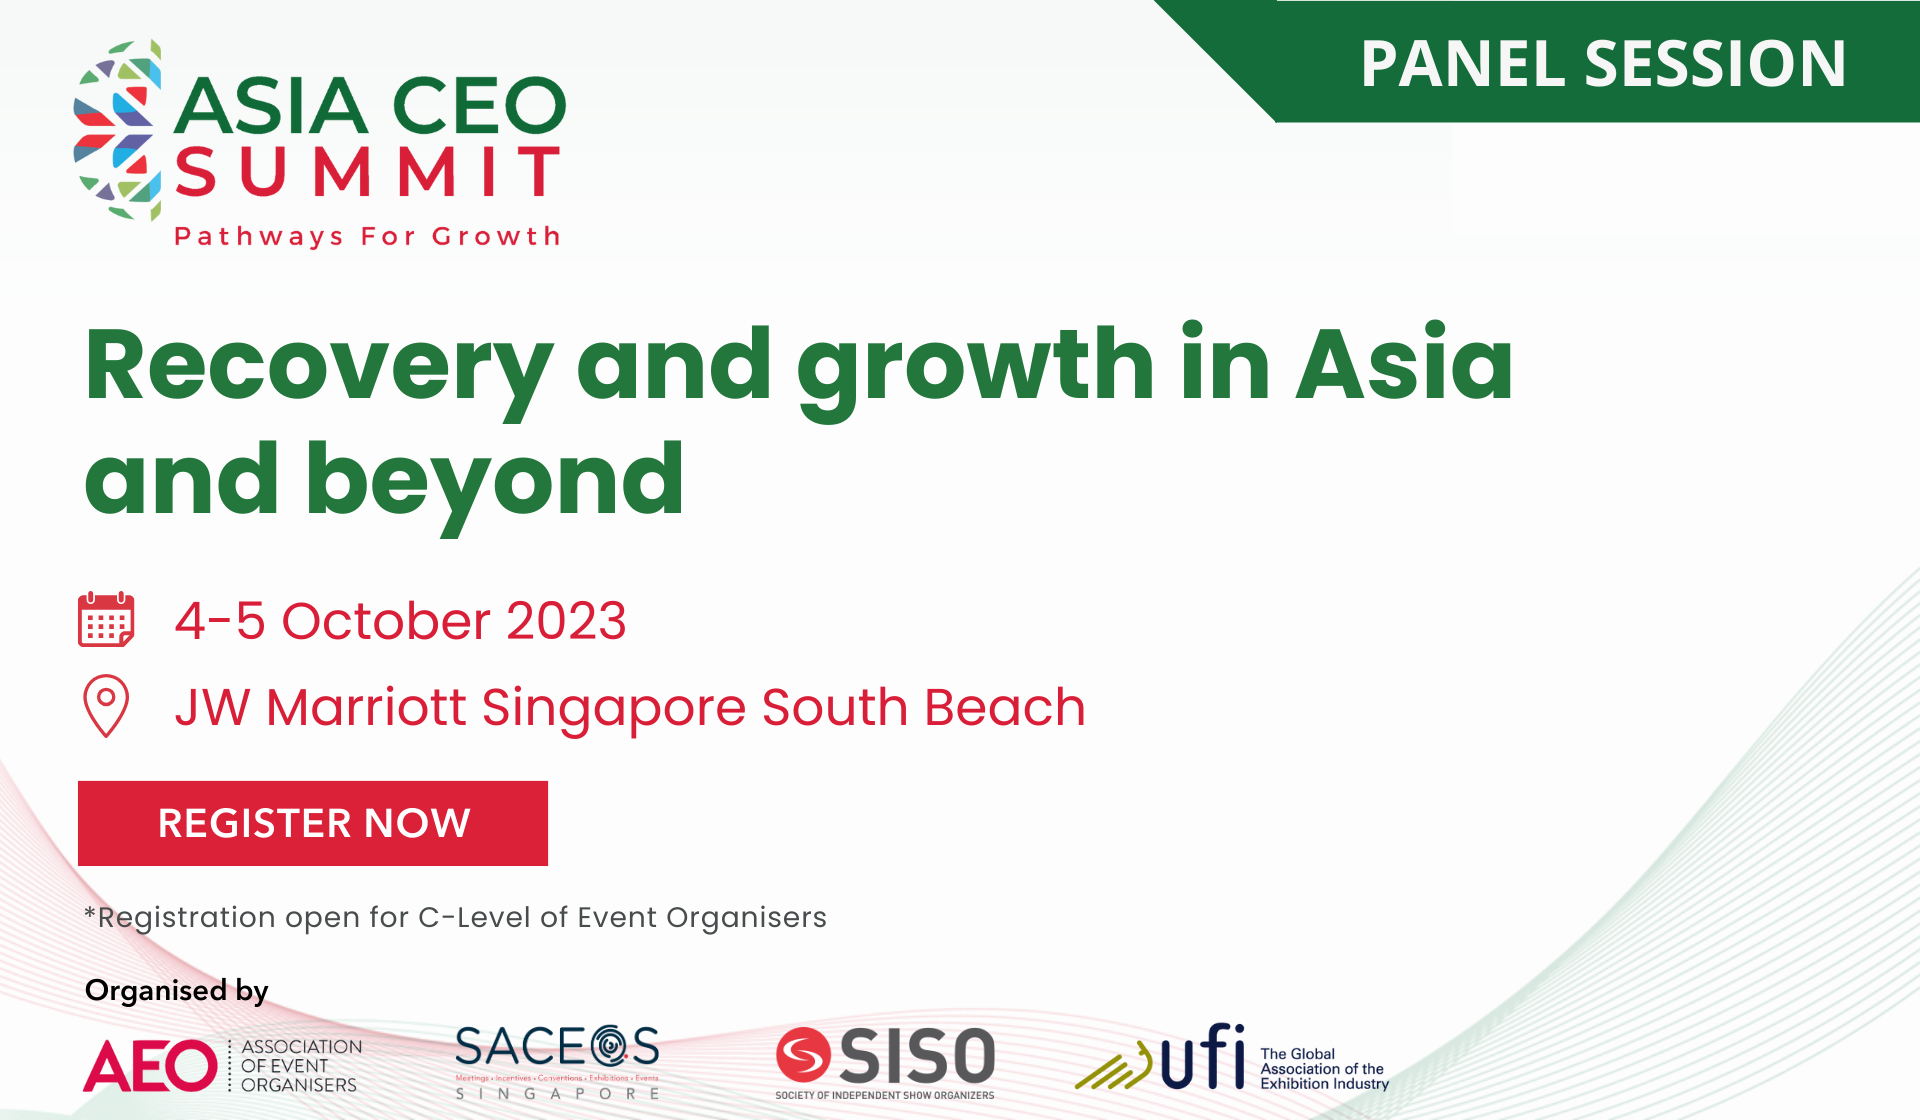 Asia CEO Summit 2023: Recovery and growth in Asia and beyond